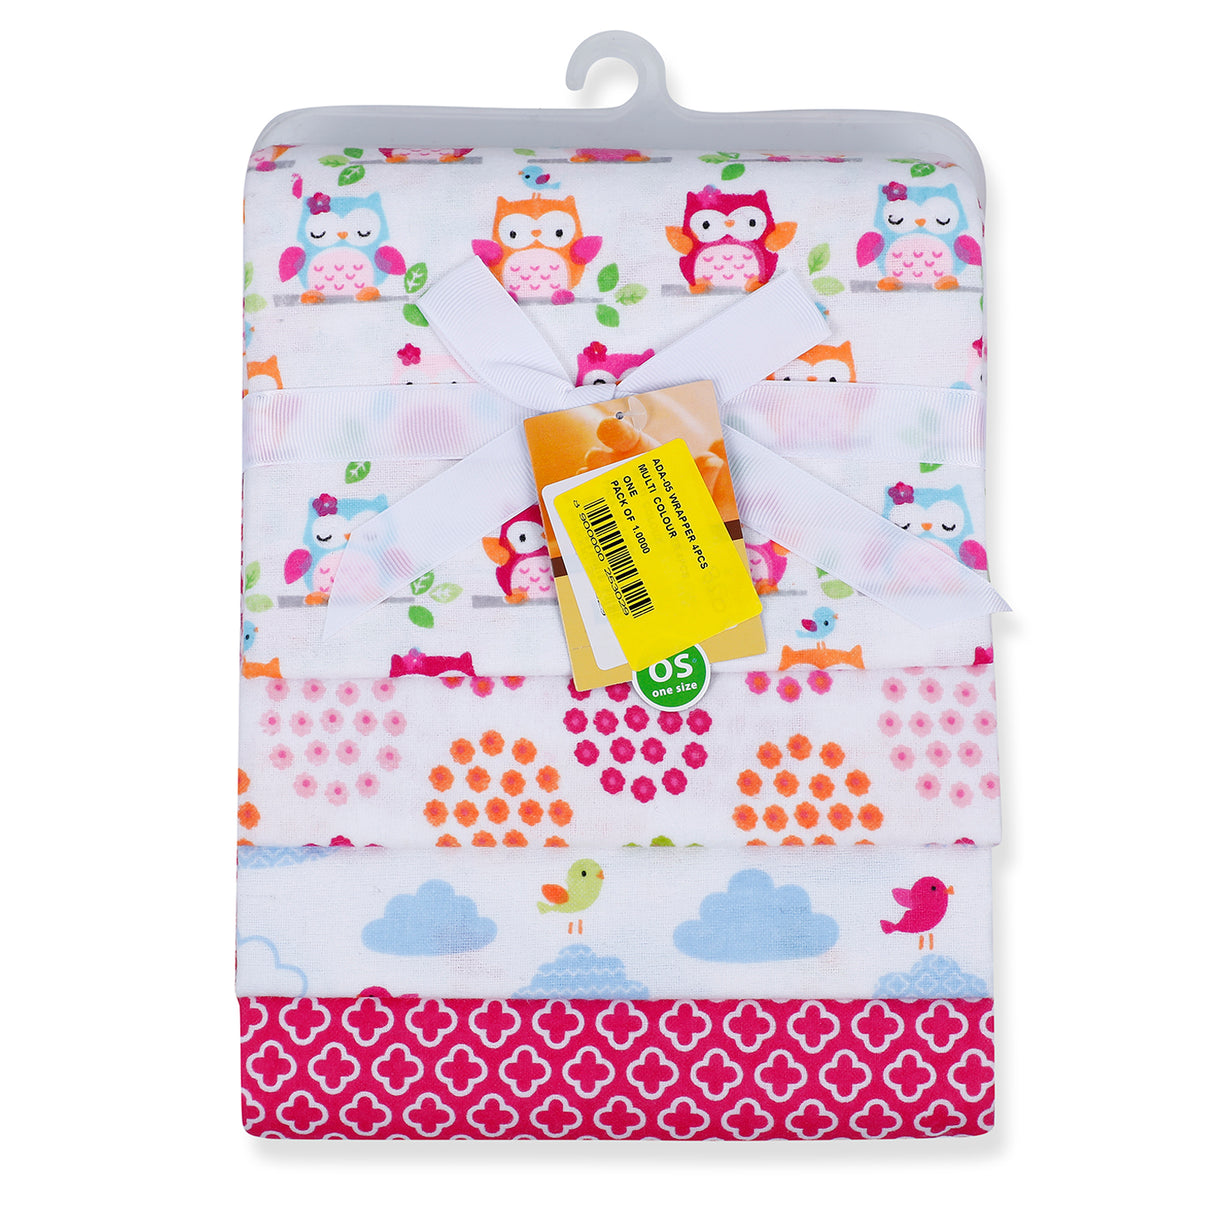 EBERRY Adorable Pack Of 4 Cozy Wrapper